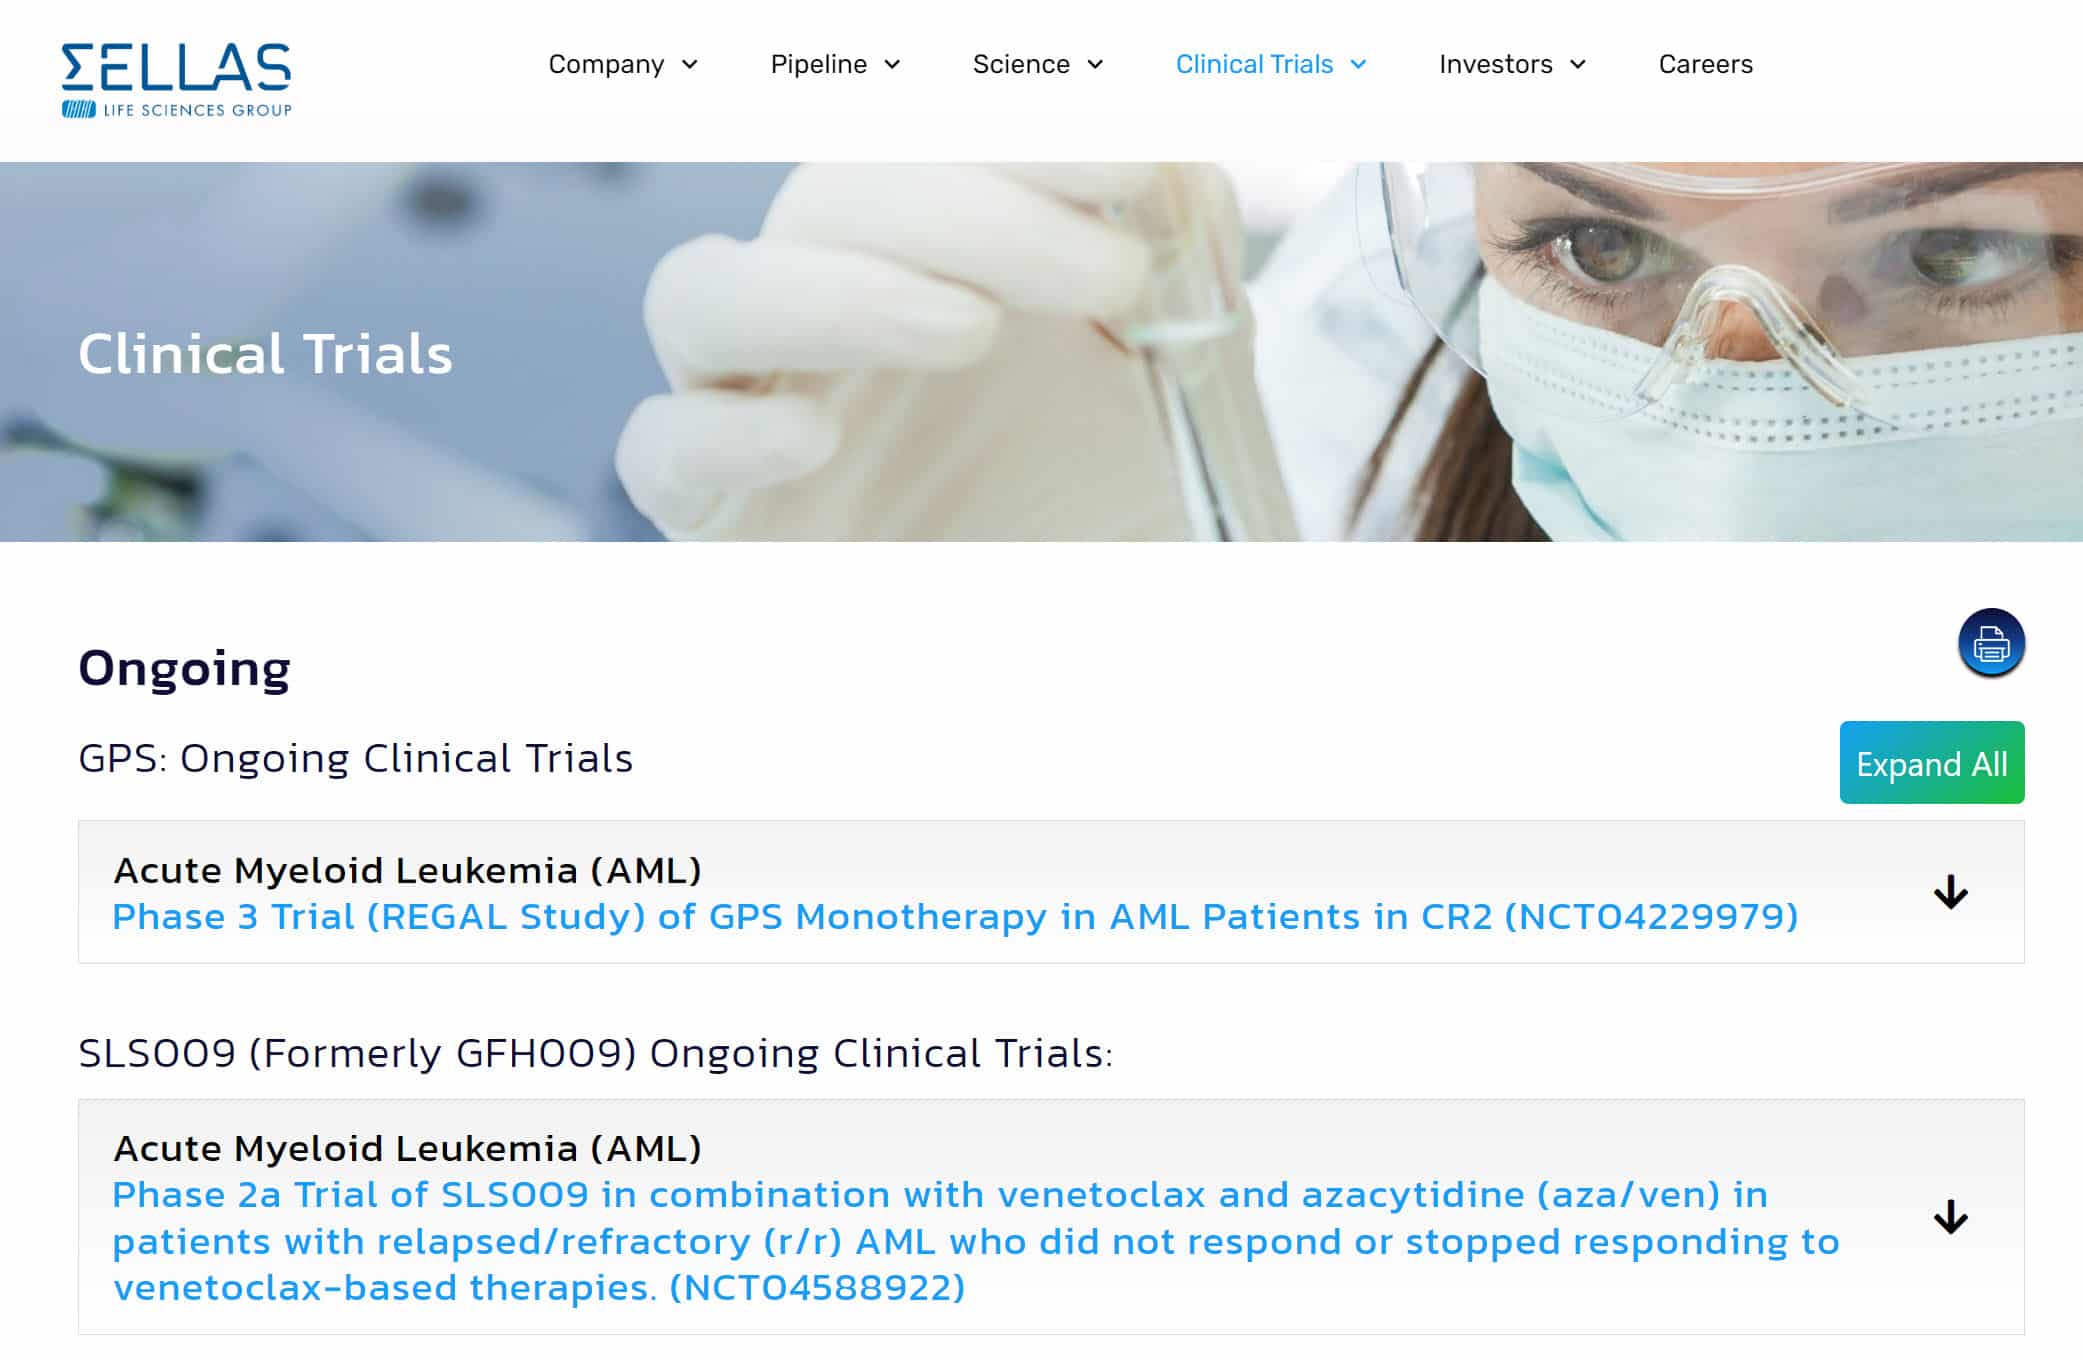 Sellas biotech website clinical trials blog image